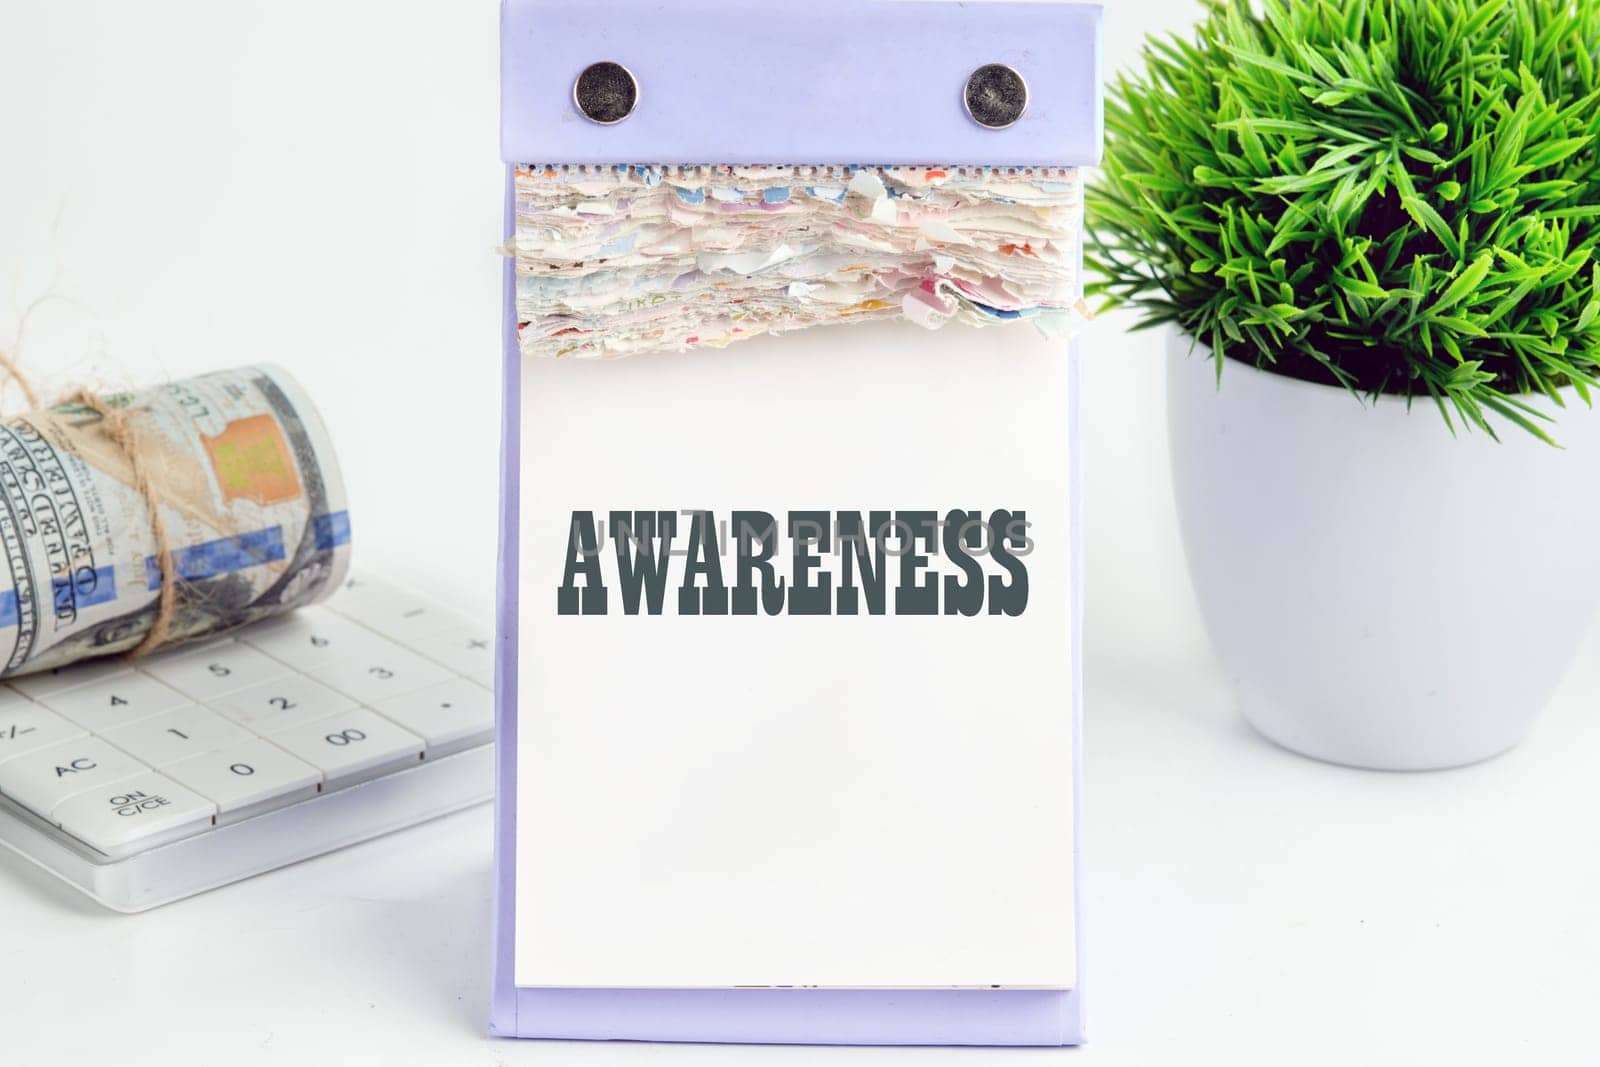 AWARENESS word writing on a desktop tear-off calendar on a white background, next to a calculator with a roll of banknotes with a flower out of focus in the background